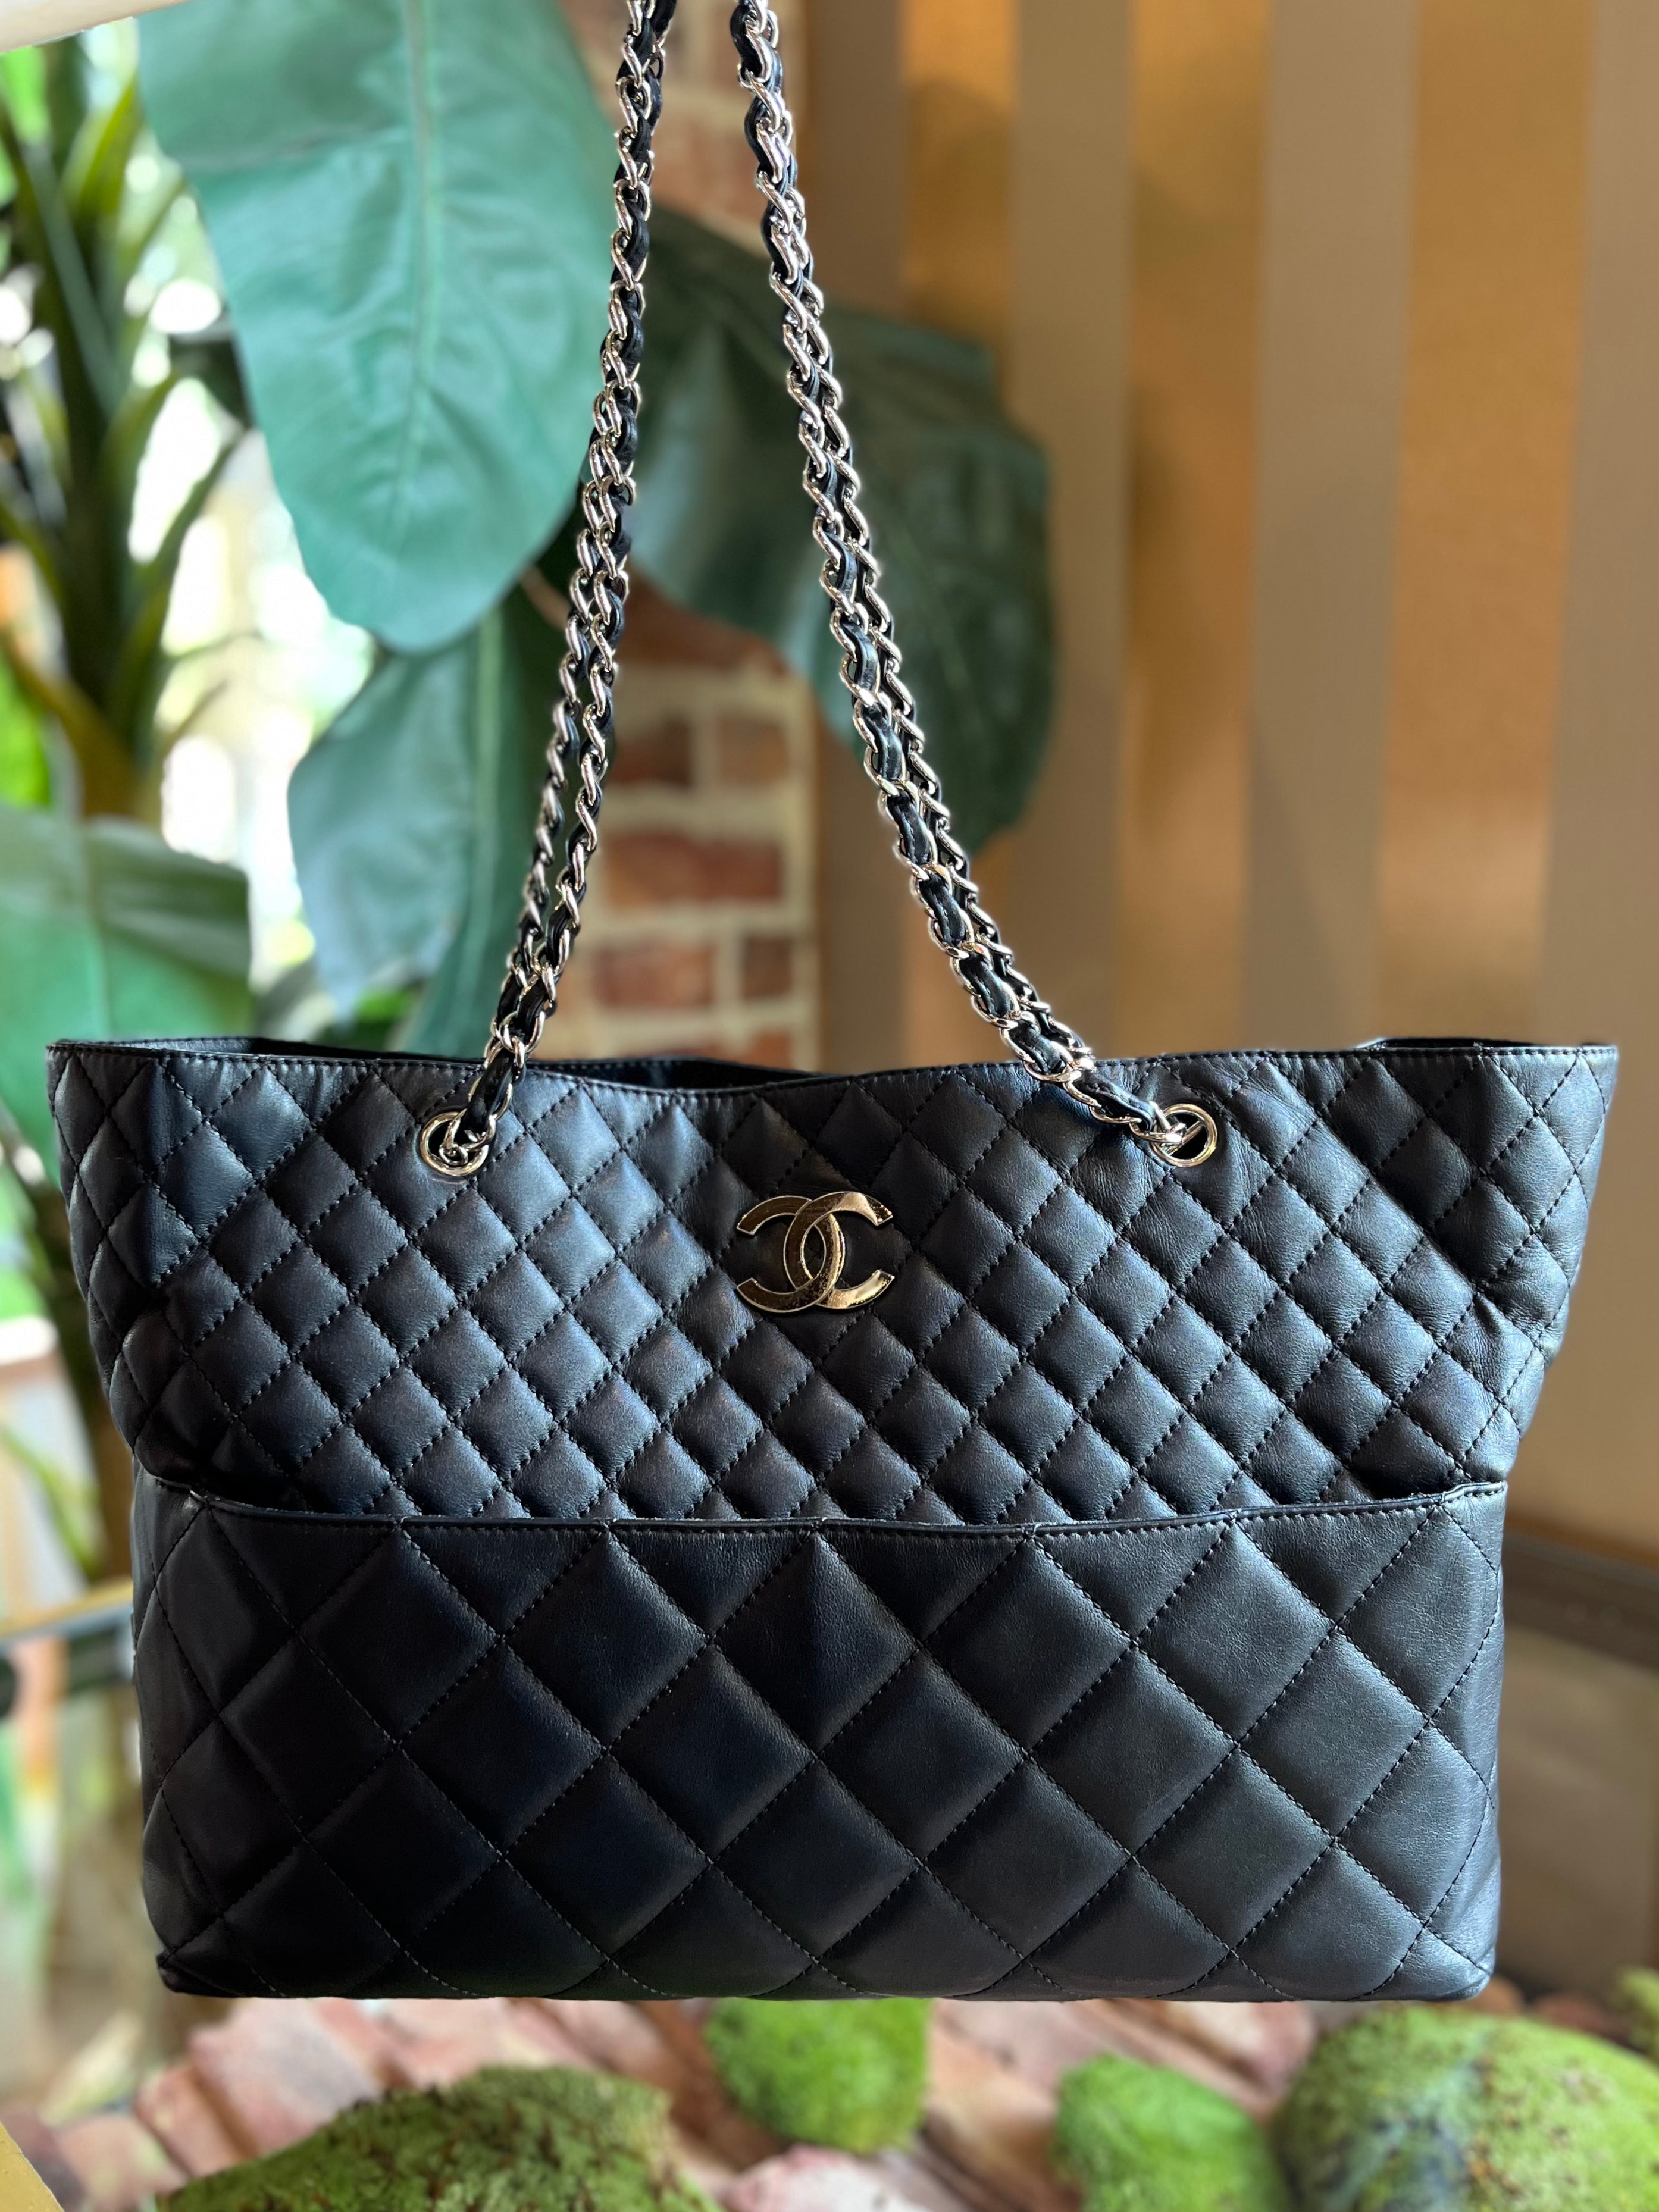 CHANEL 10A XL BLACK QUILTED LEATHER KARL'S CABAS FANTASY FUR TOTE BAG PURSE